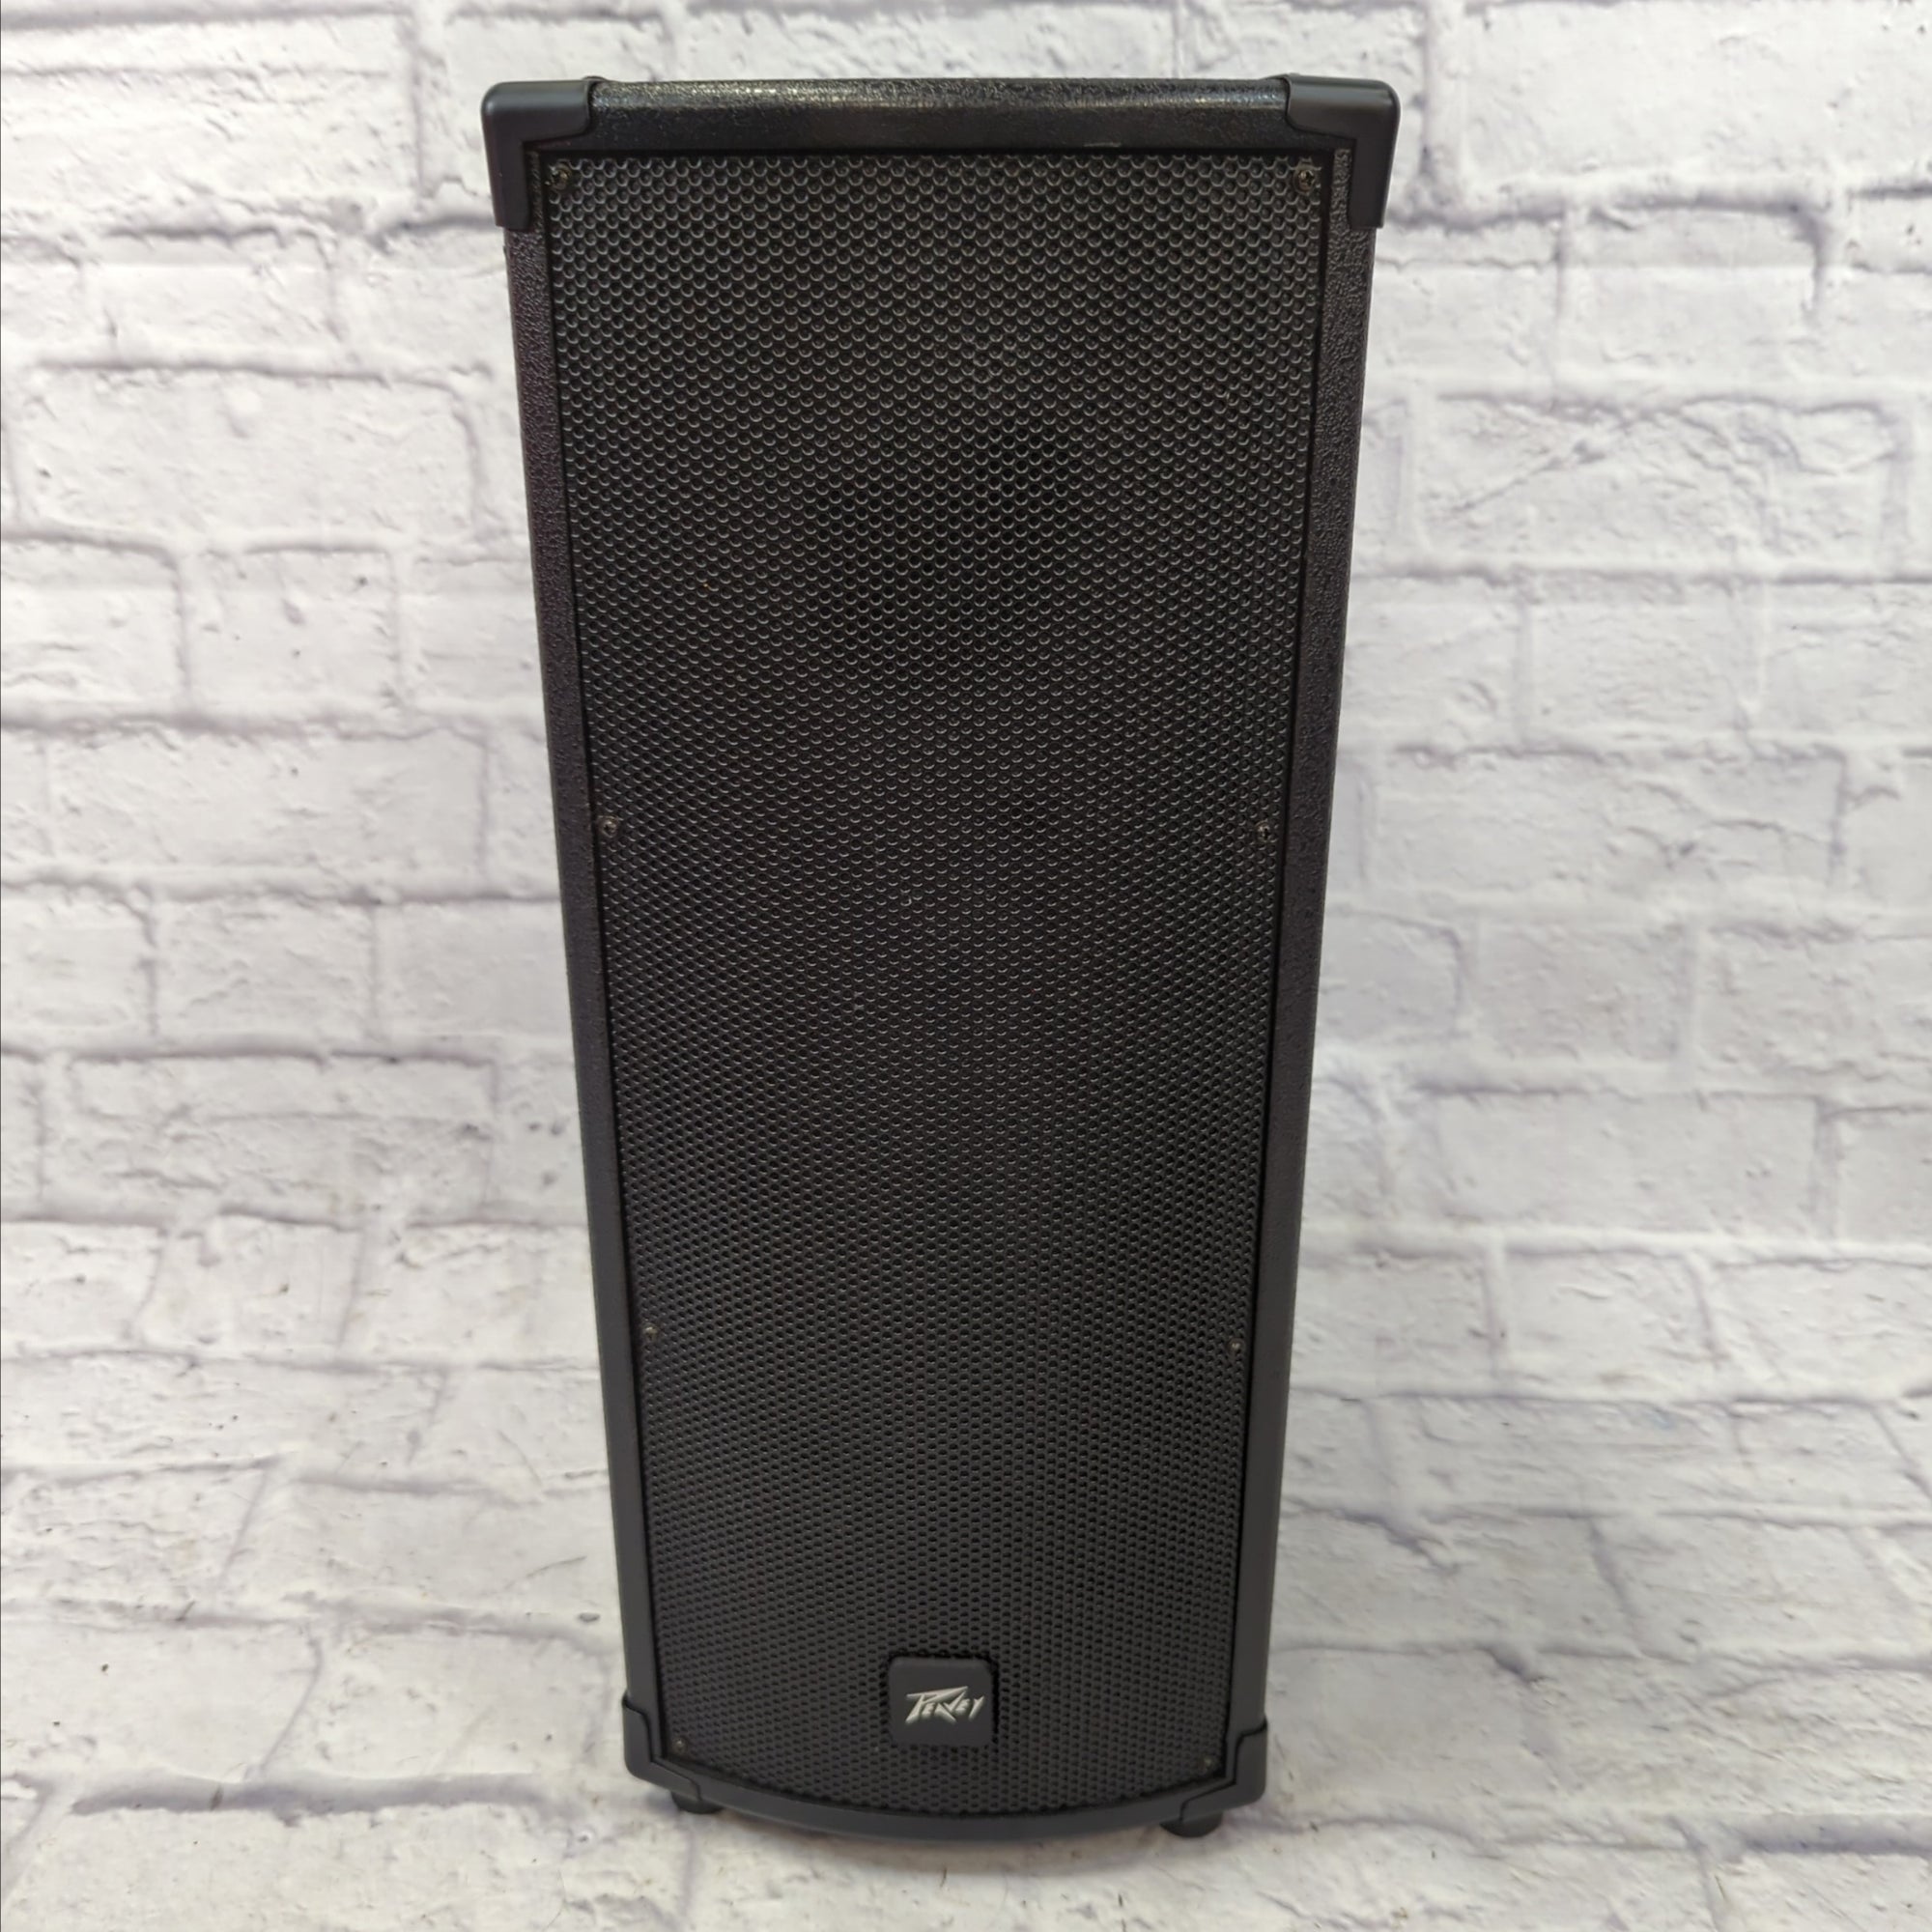  Peavey P1 BT™ All-in-One Portable PA System : Musical  Instruments